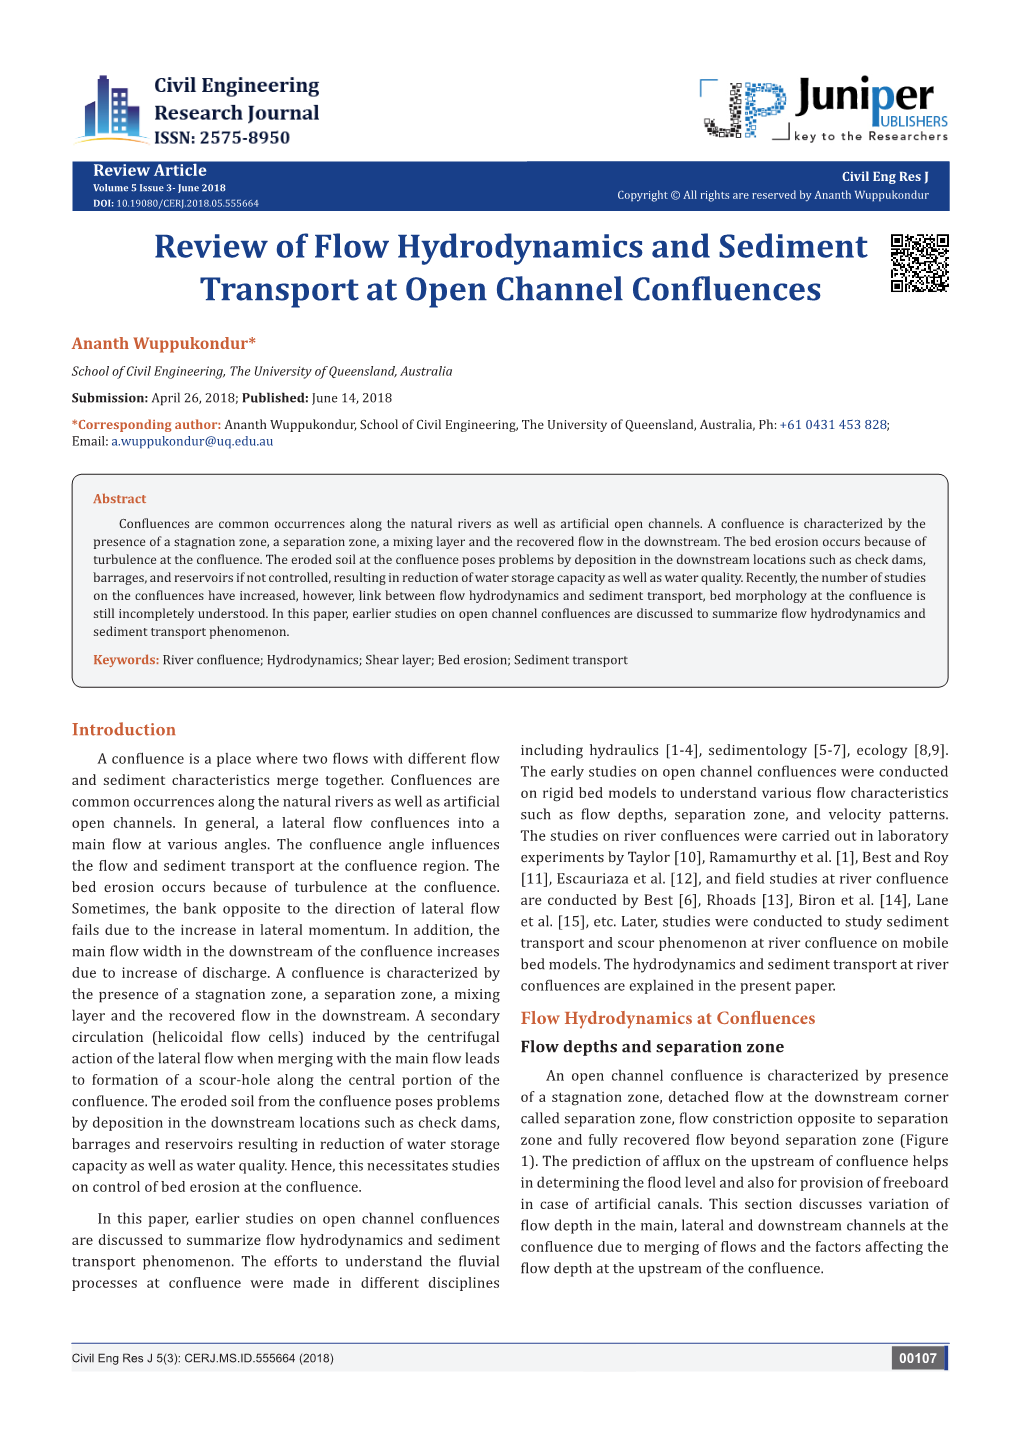 Review of Flow Hydrodynamics and Sediment Transport at Open Channel Confluences